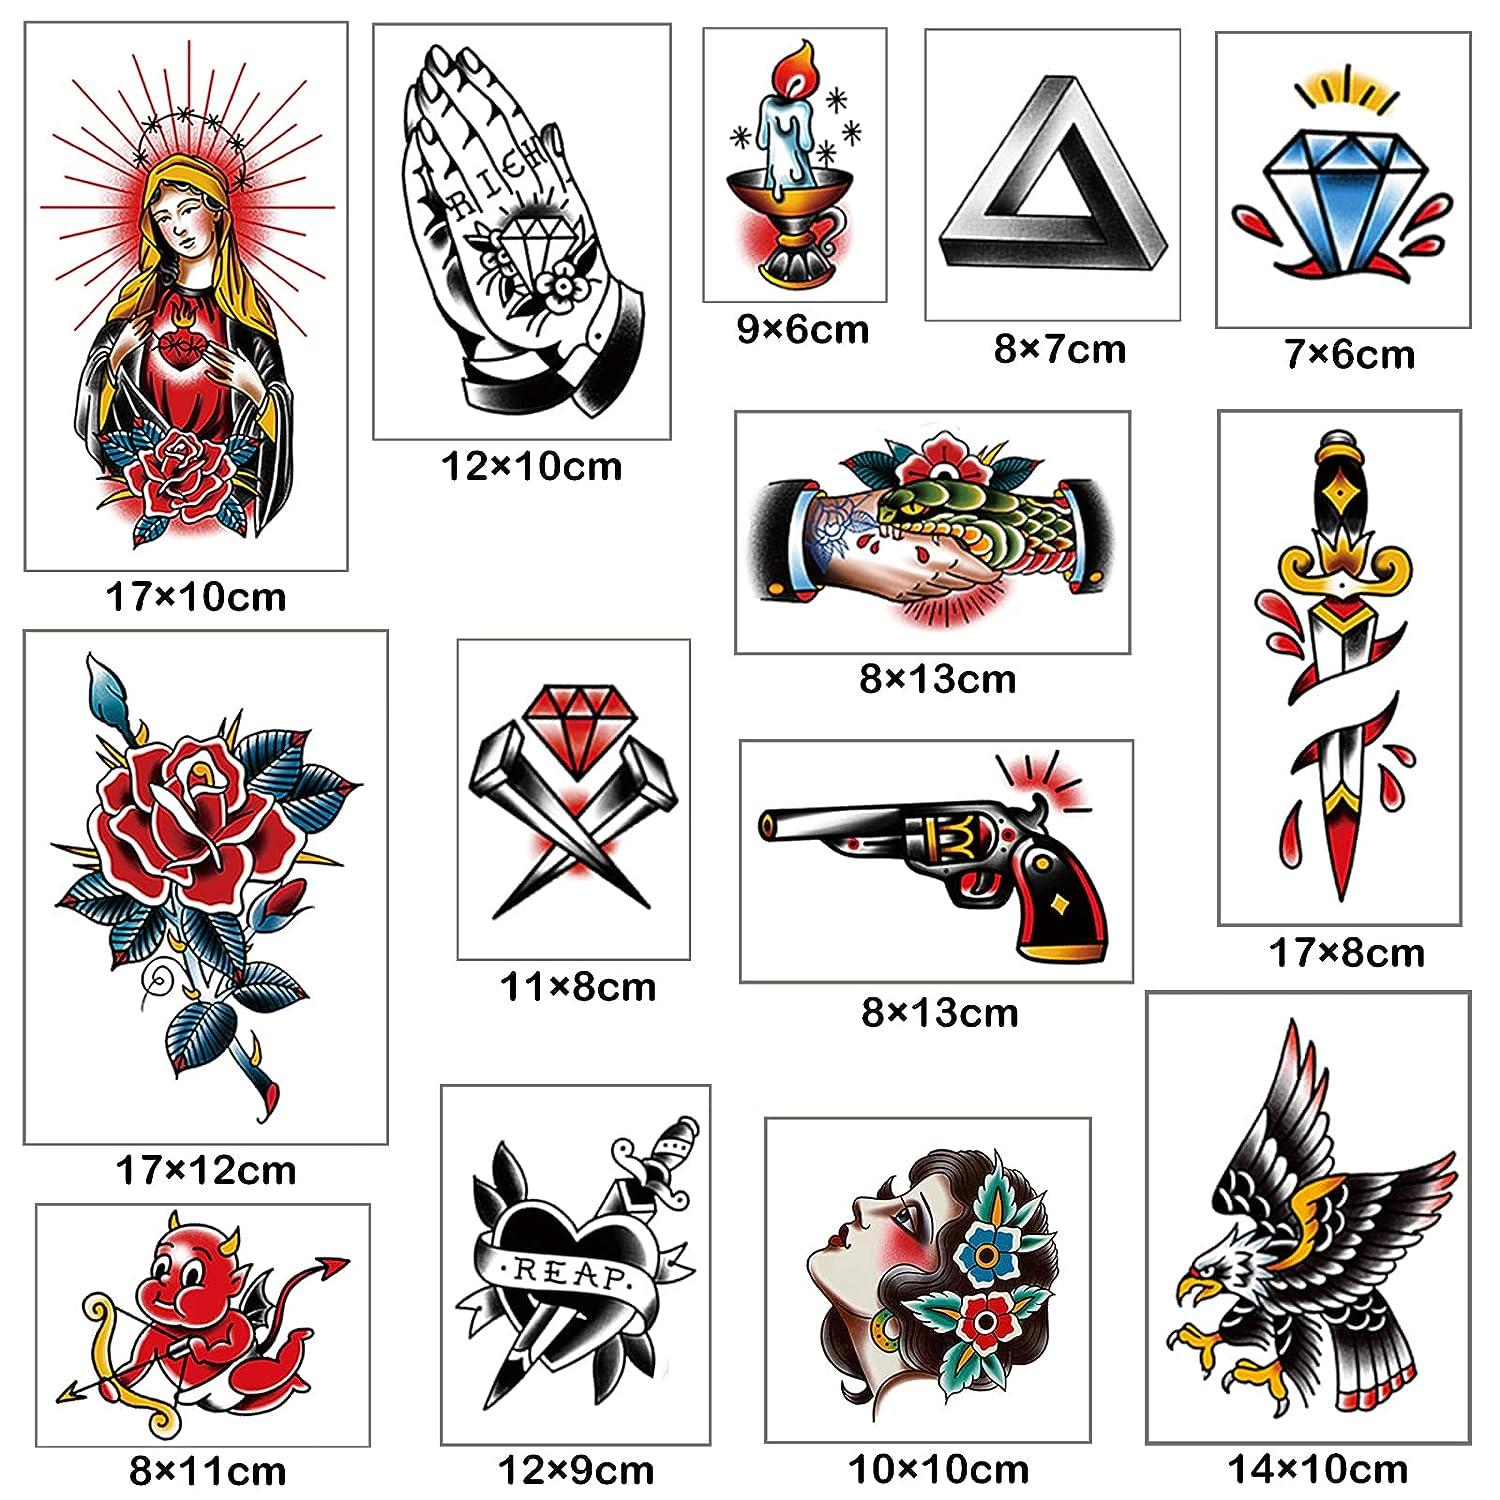 Traditional Tattoo Ideas & Meanings - Anchors, Daggers, Flash, Ships &  More...